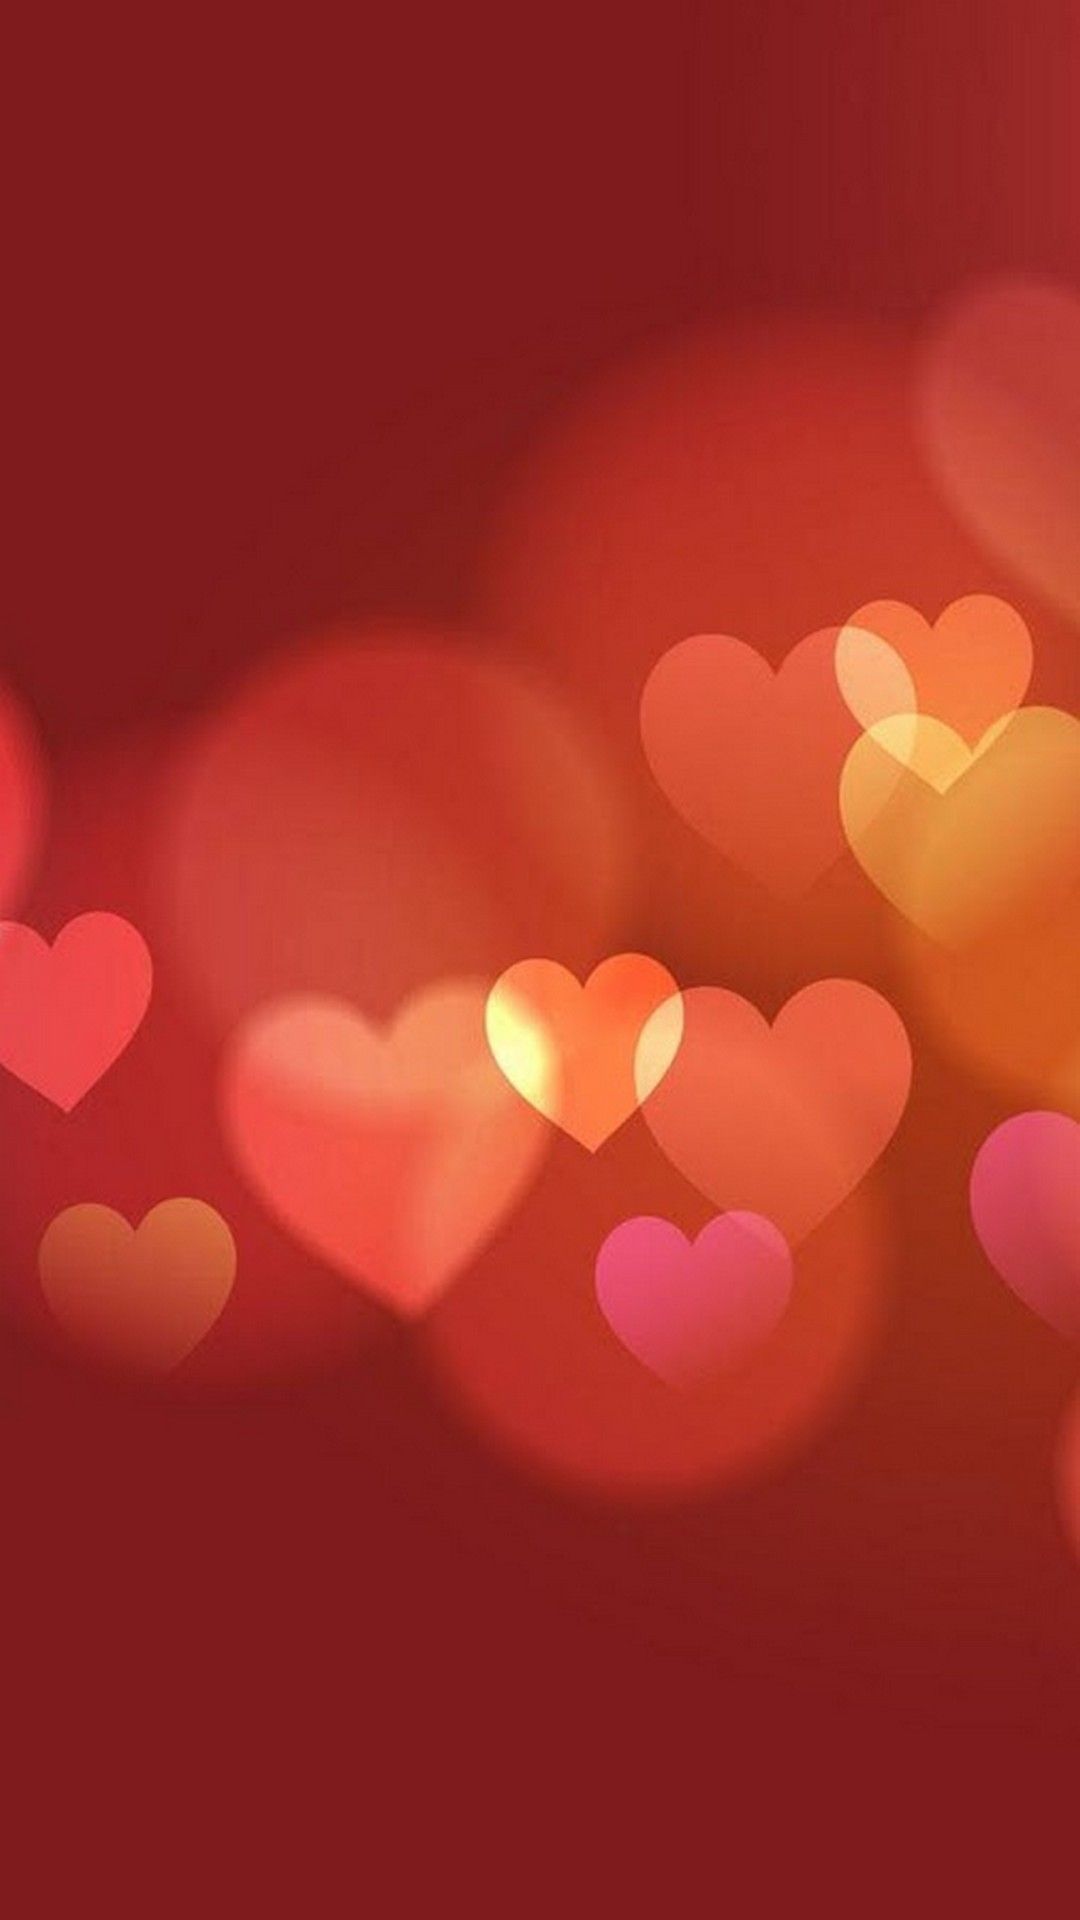 Fine Love Background Pictures For Valentines Day Wallpaper Image For Free  Download  Pngtree